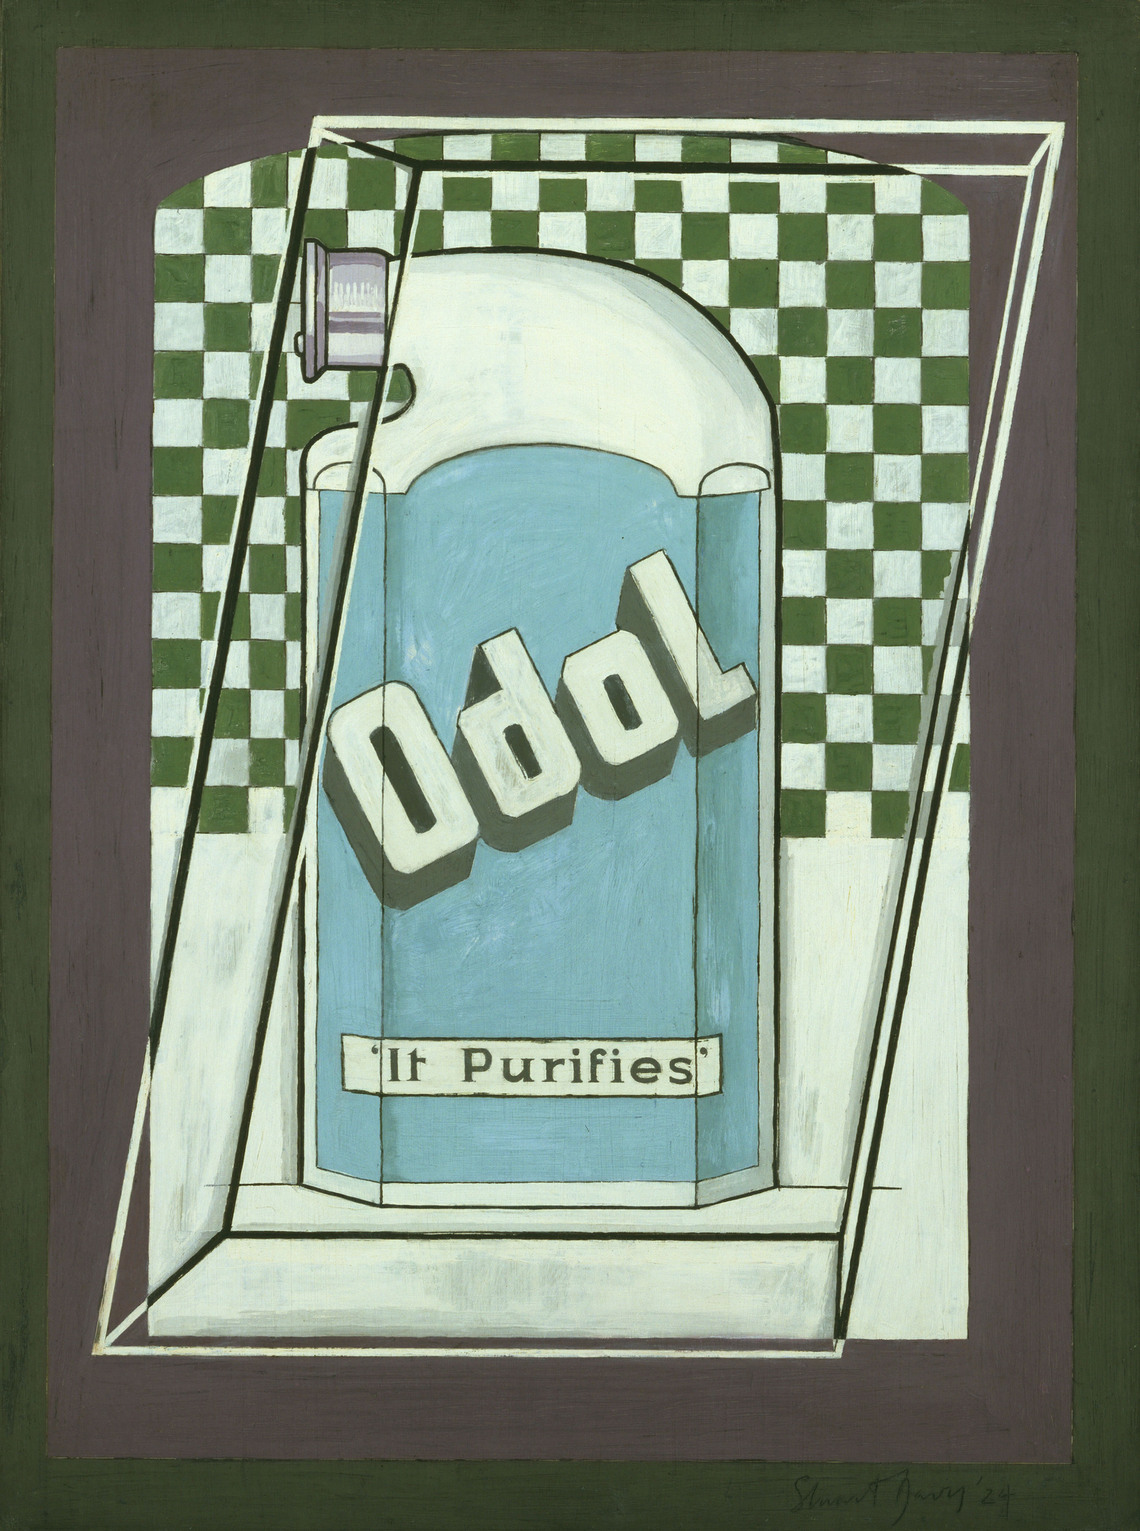 Odol (1924) by Stuart Davis. Oil on cardboard, 24 × 18 in. (60.9 × 45.6 cm). The Museum of Modern Art, New York; Mary Sisler Bequest (by exchange) and purchase, 1997. © Estate of Stuart Davis. As reproduced in Modern Art In America 1908–68